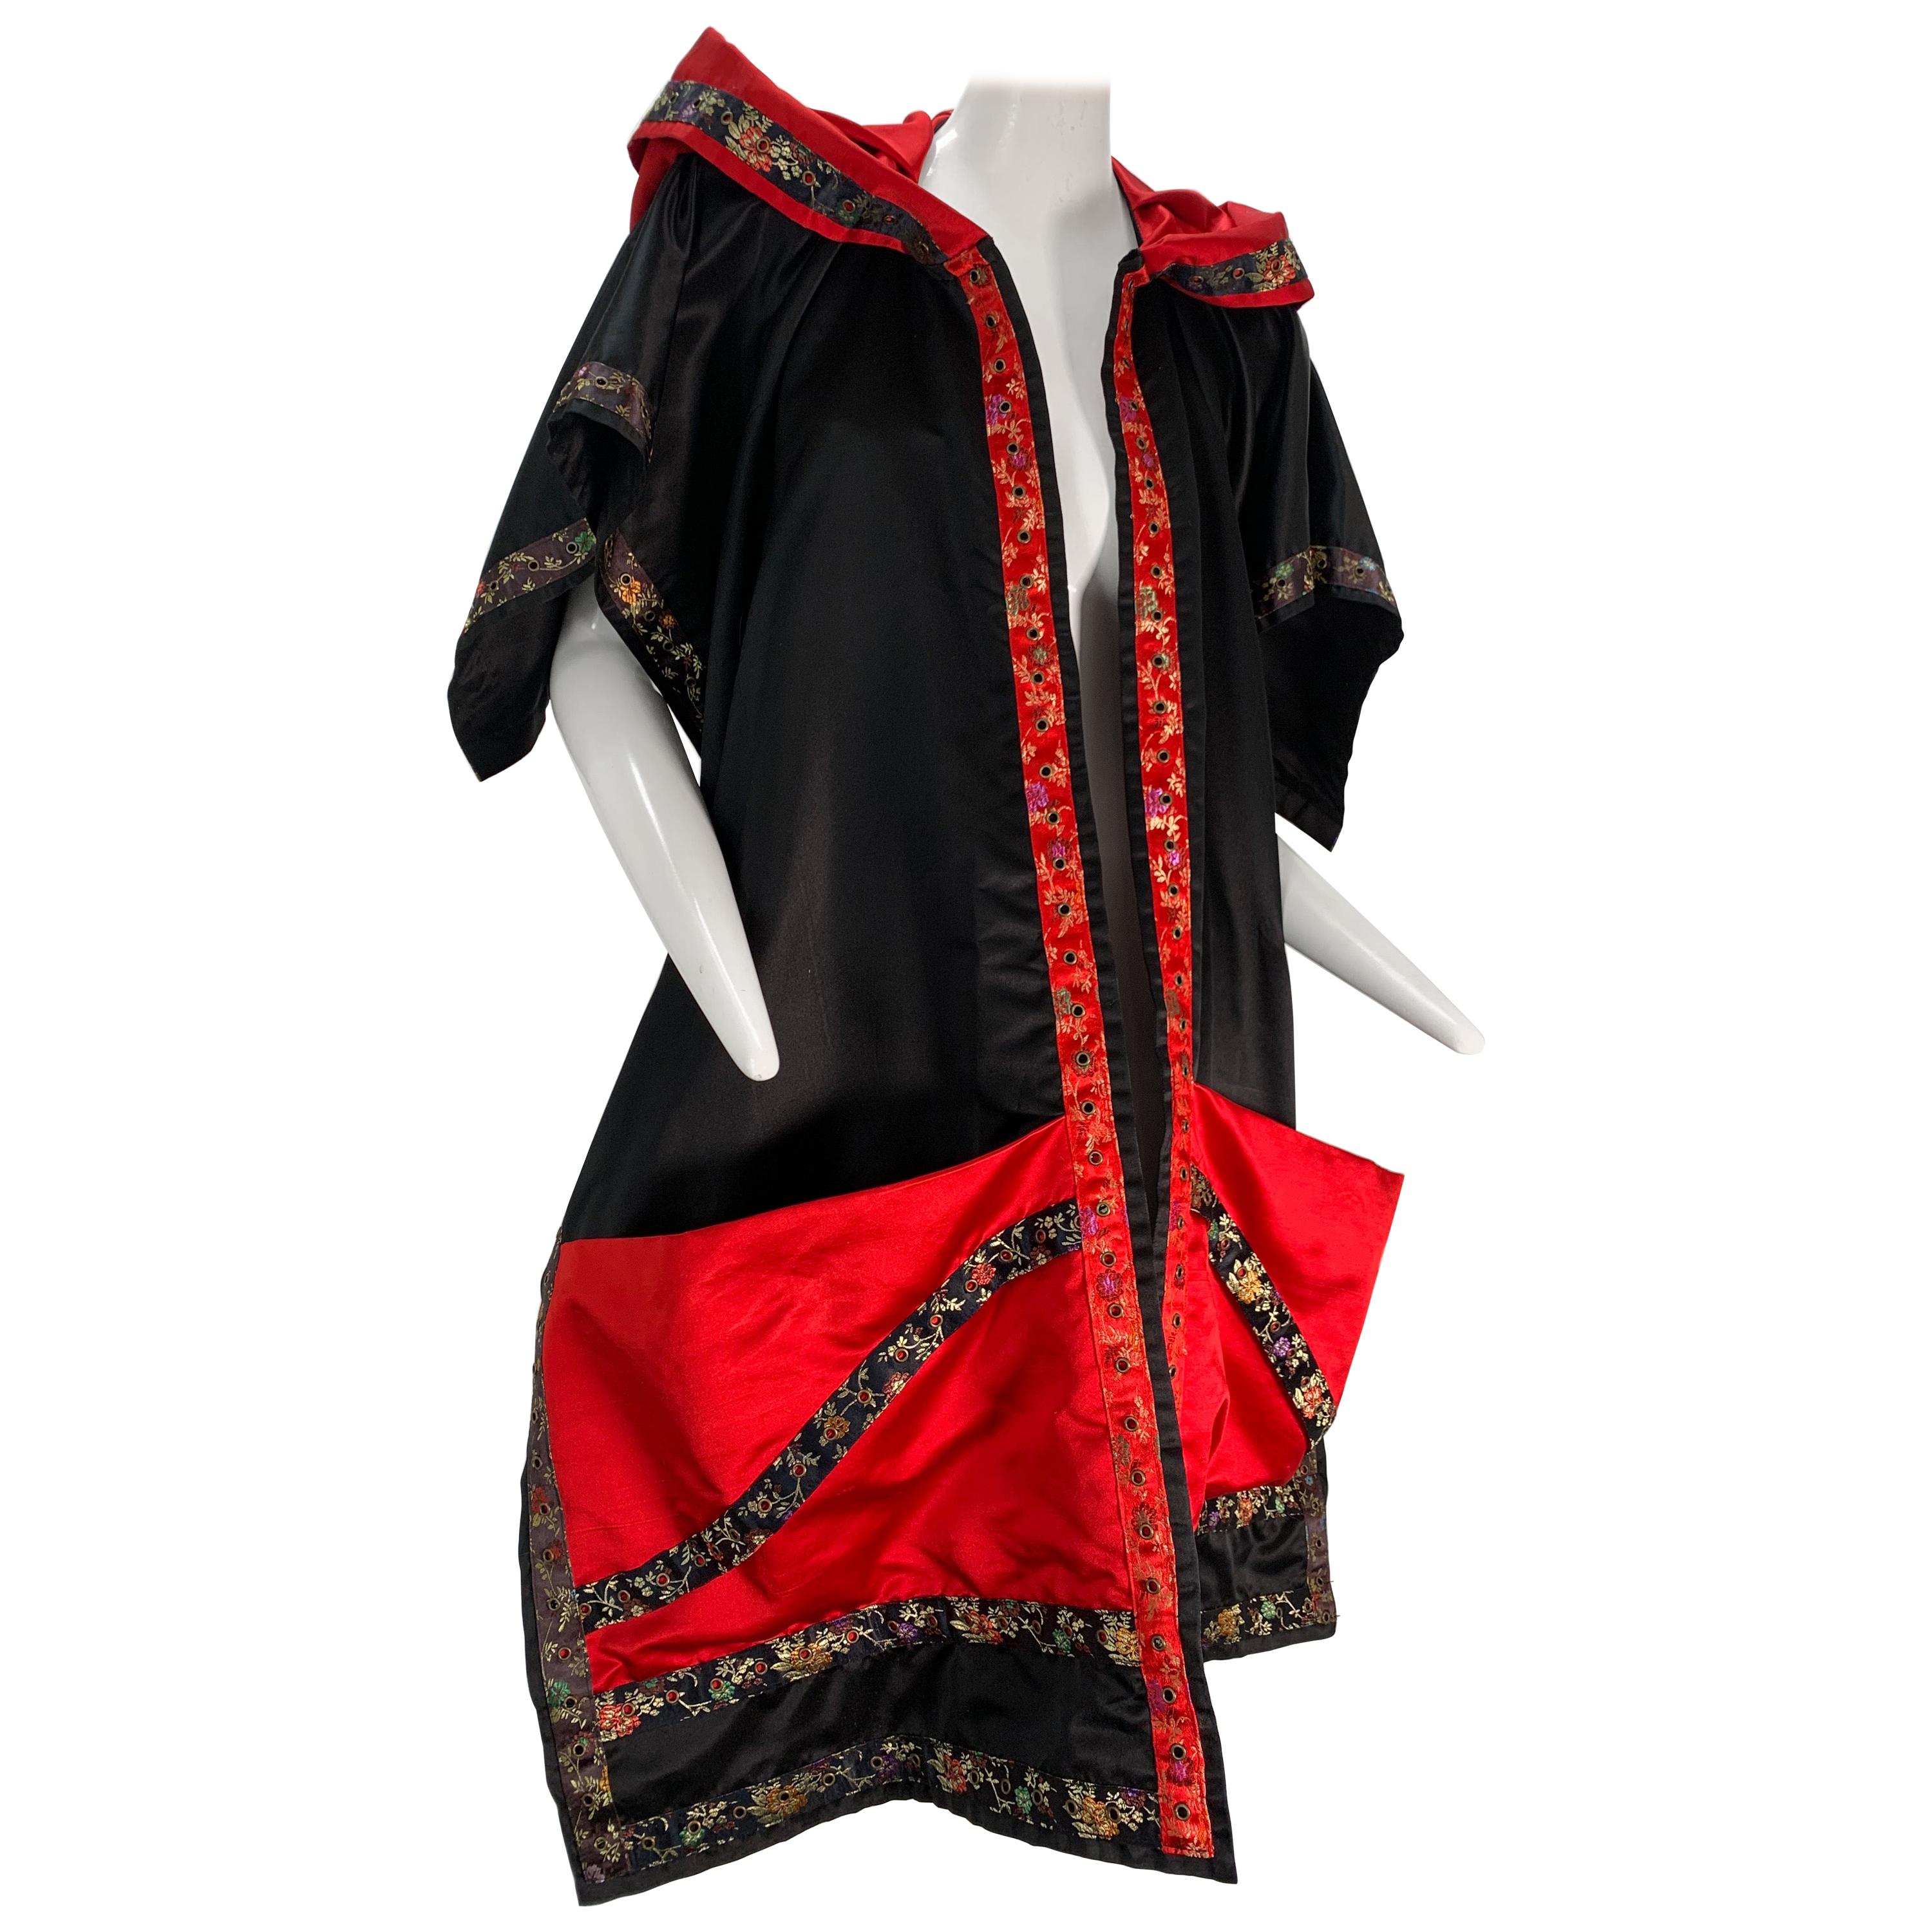 Torso Creations Black & Red Silk Satin Hooded Wrap Stole Trimmed In Brocade Tape For Sale